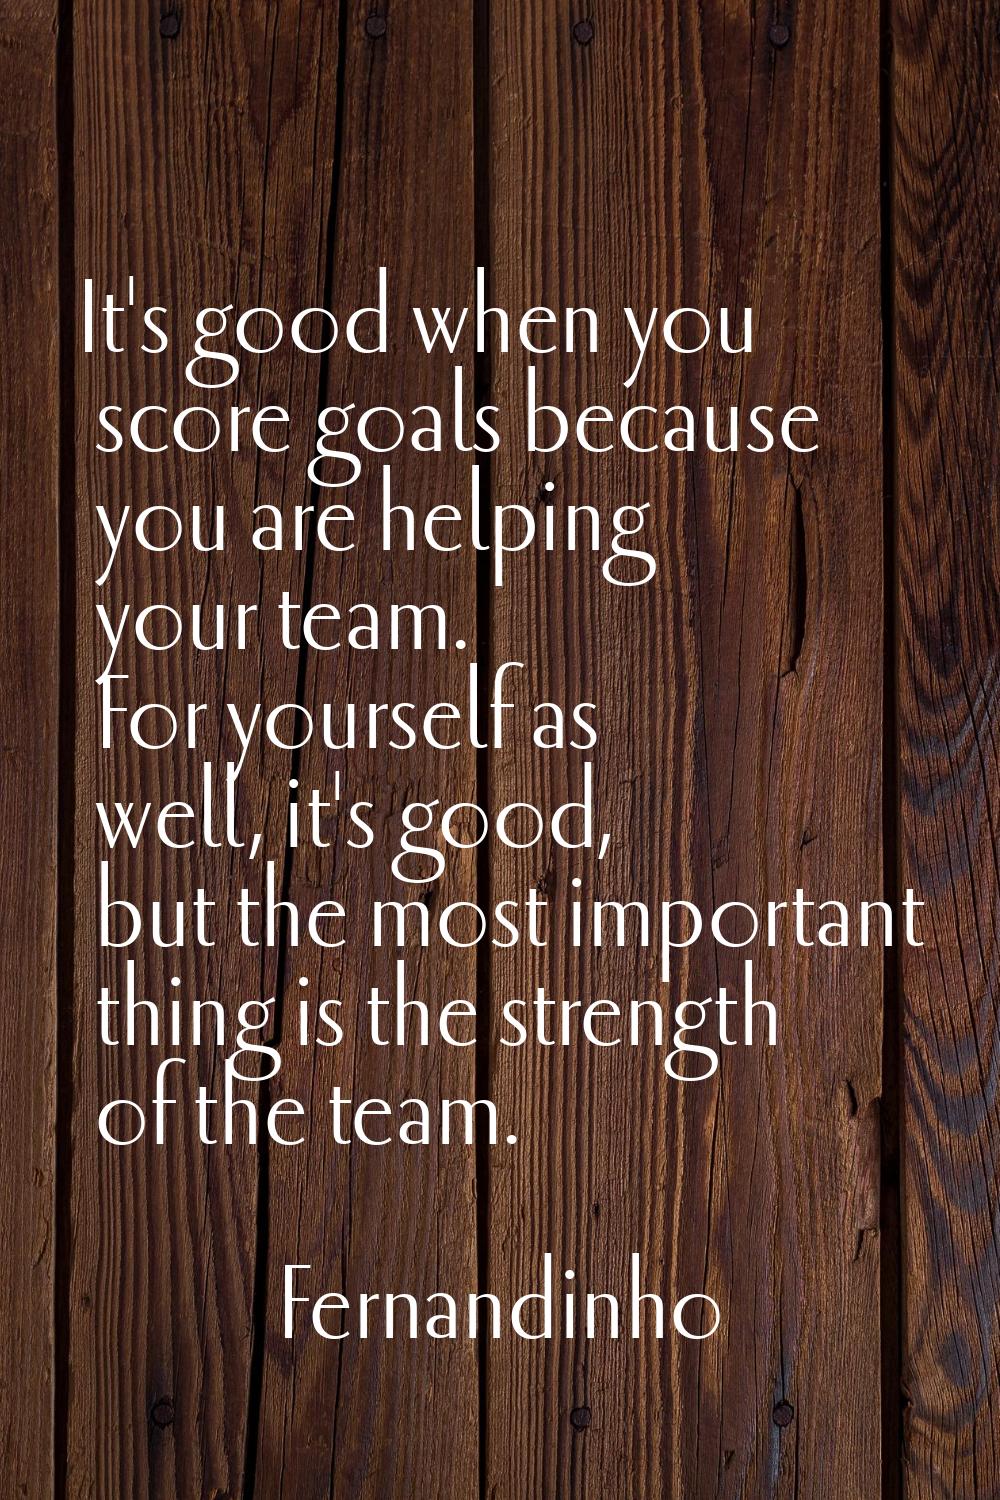 It's good when you score goals because you are helping your team. For yourself as well, it's good, 